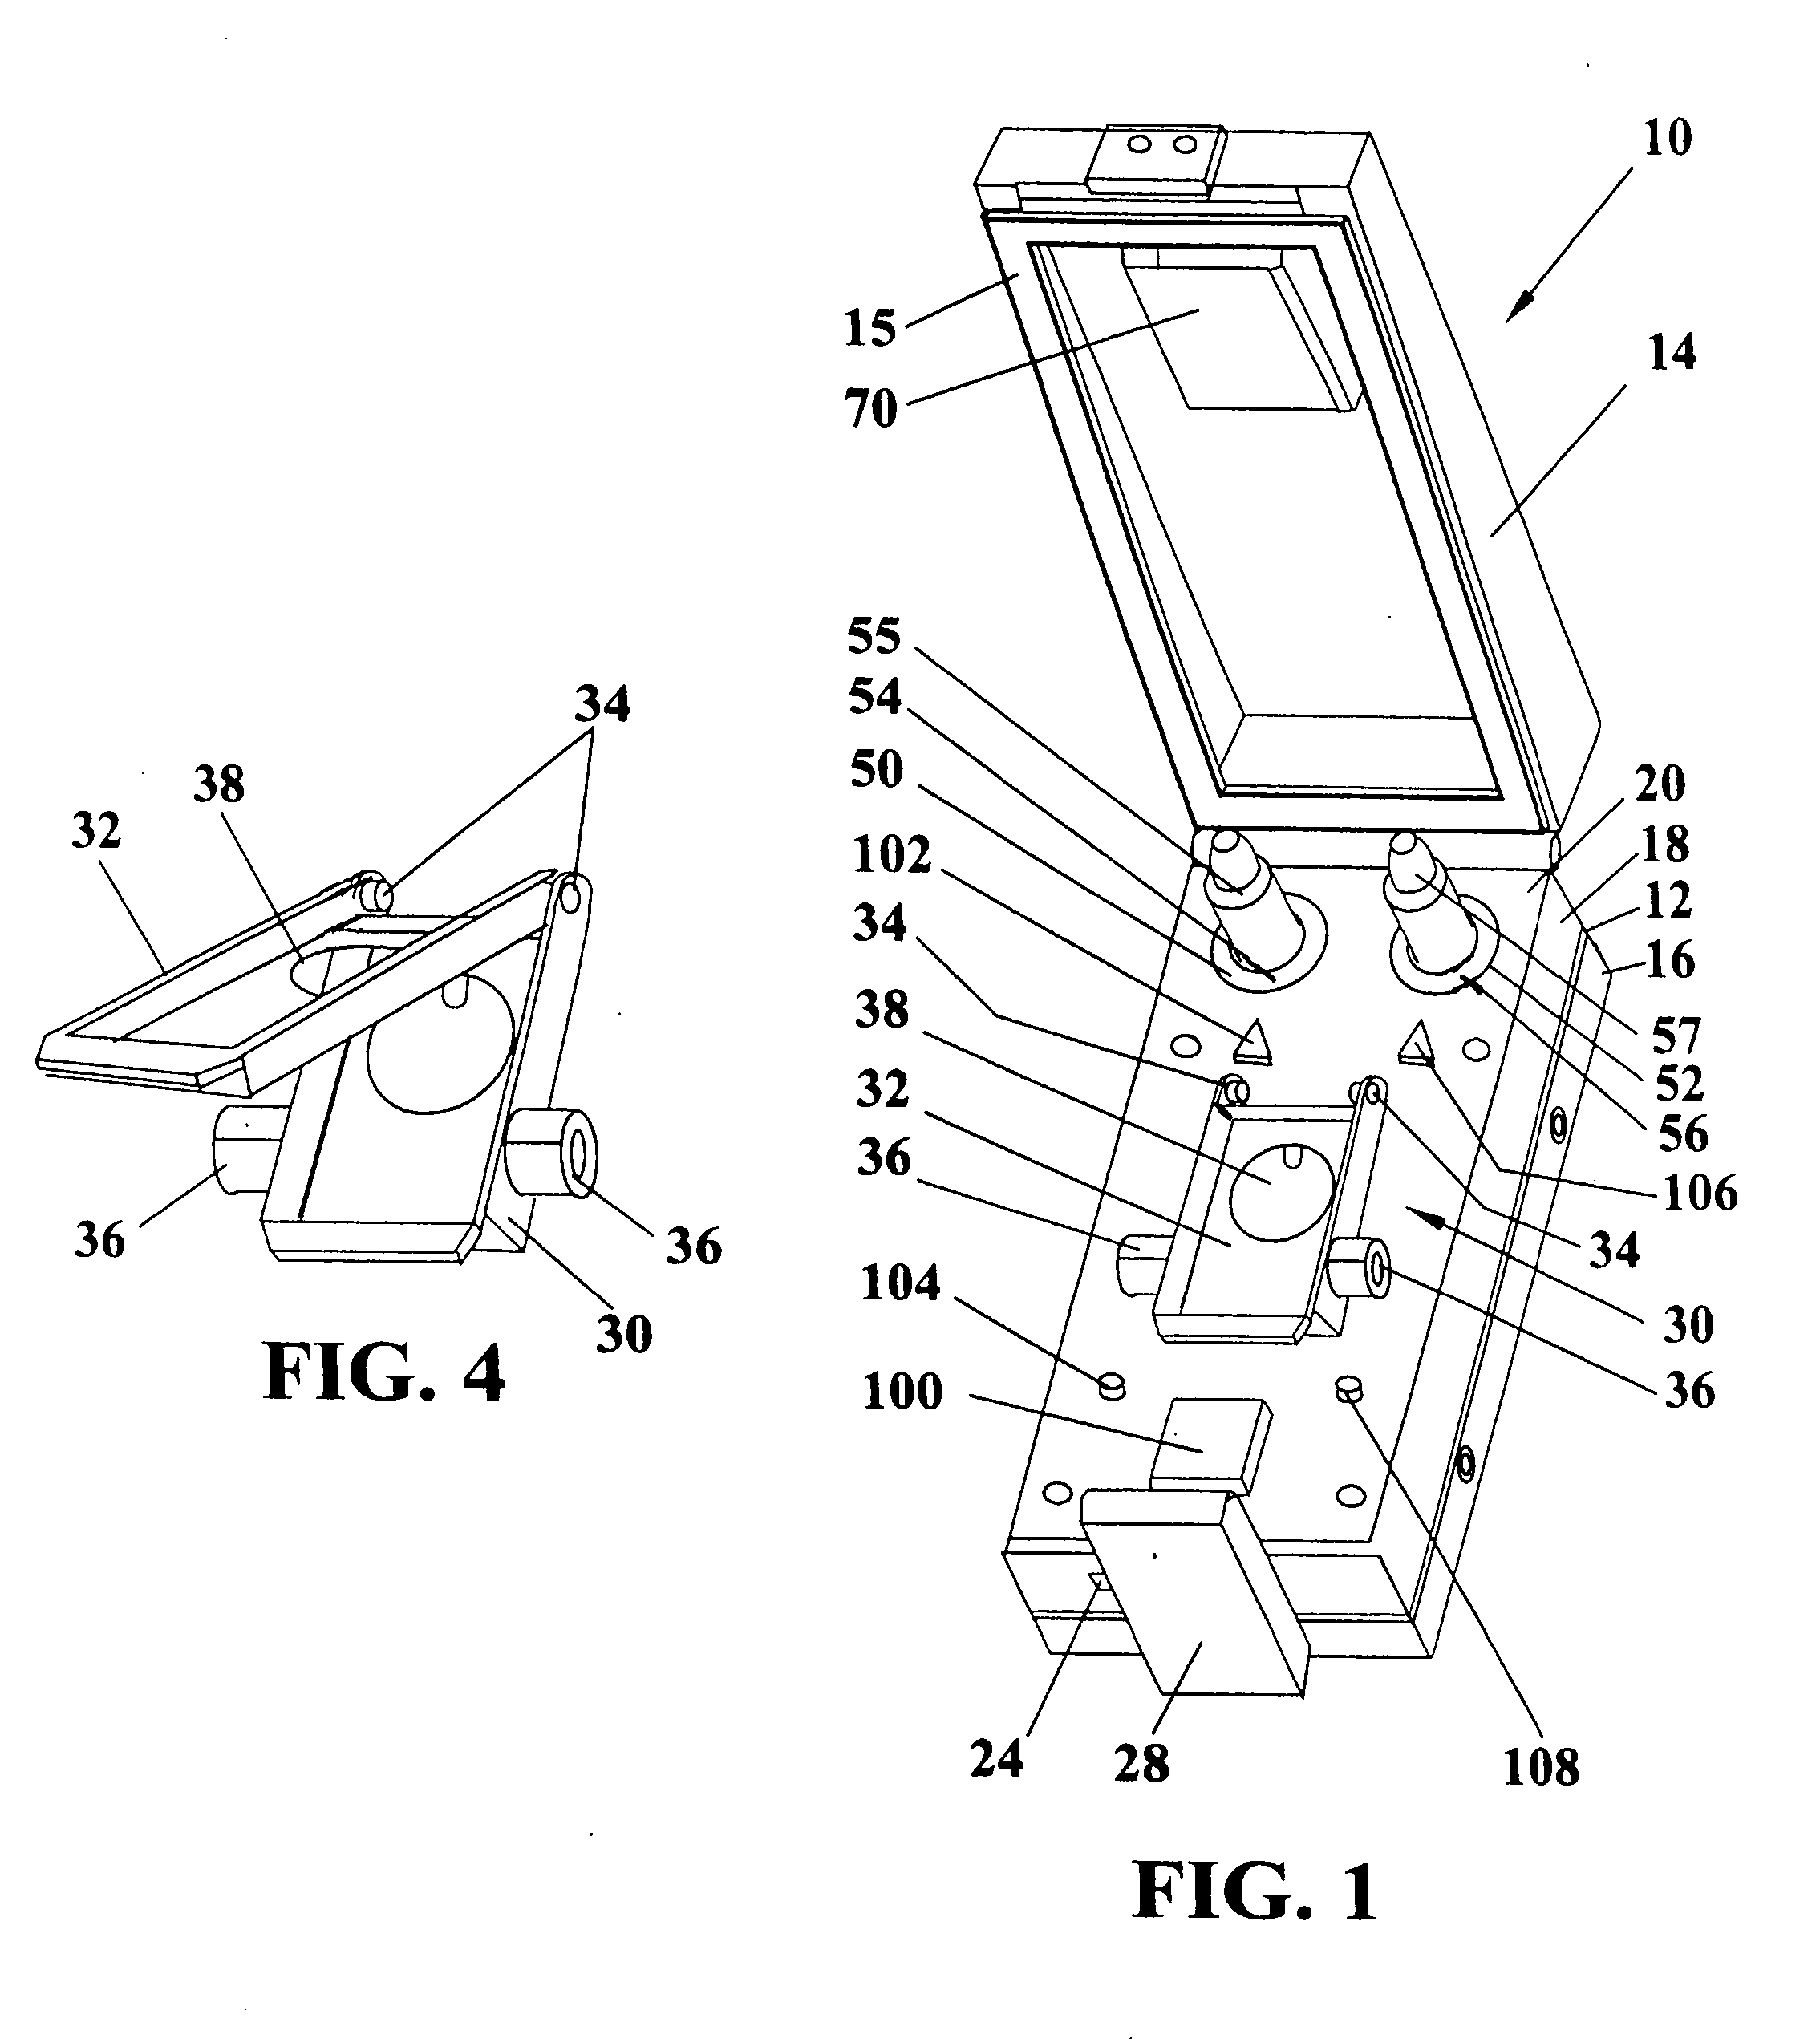 System and method for explosives detection